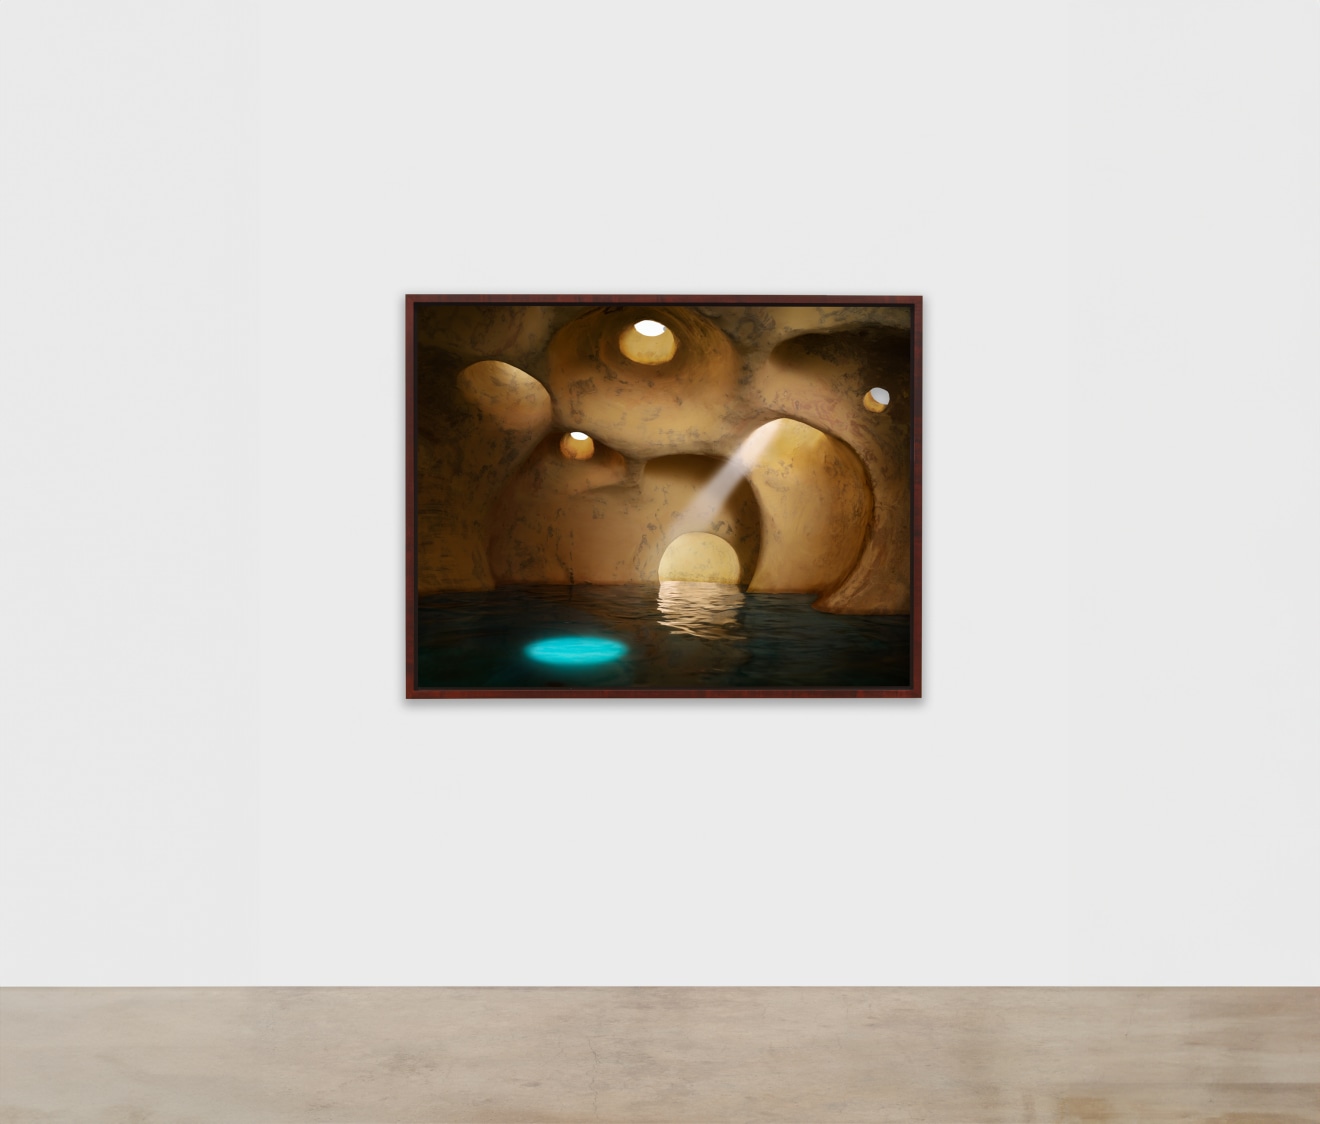 James Casebere,&nbsp;Cavern with Skylights H, 2024, framed archival pigment print mounted to Dibond, paper: 46 3/4 x 60 3/4 inches, framed: 49 9/16 x 63 9/16 x 2 1/4 inches&nbsp;&copy; James&nbsp;Casebere Courtesy: the artist and Sean Kelly, New York/Los Angeles